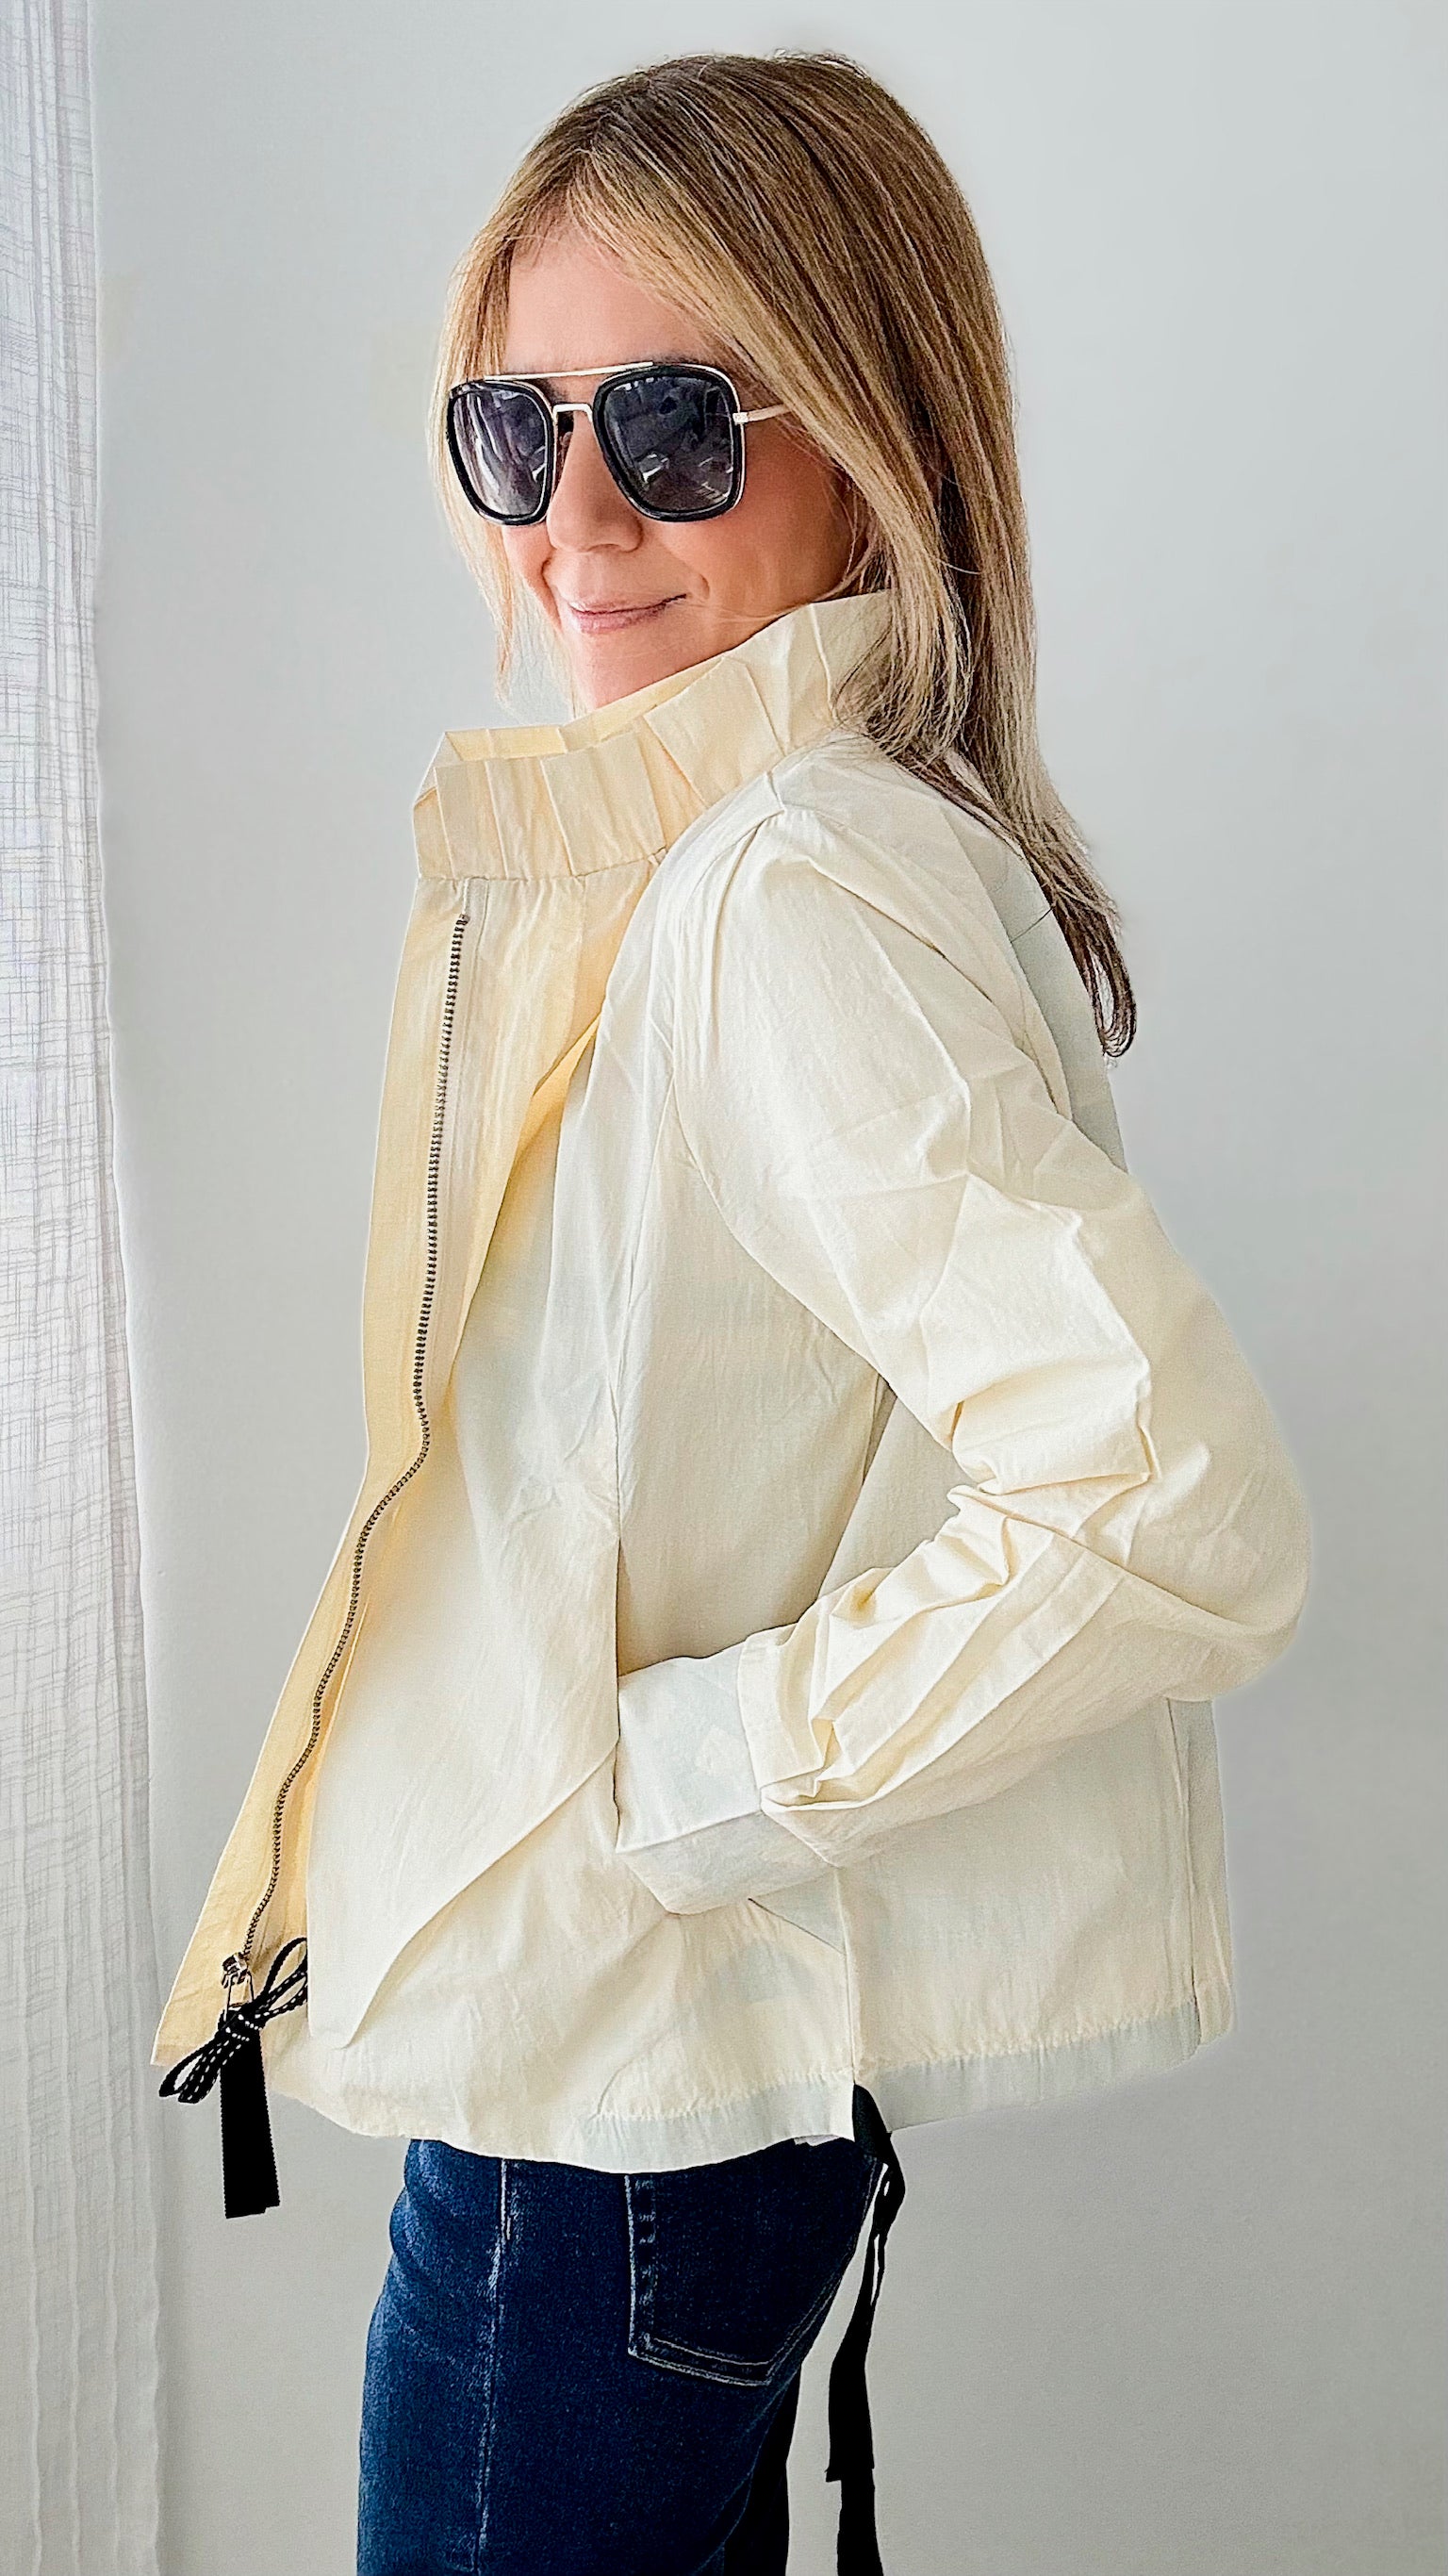 Timberlane Woven Jacket - Cream/Beige-160 Jackets-Joh Apparel-Coastal Bloom Boutique, find the trendiest versions of the popular styles and looks Located in Indialantic, FL